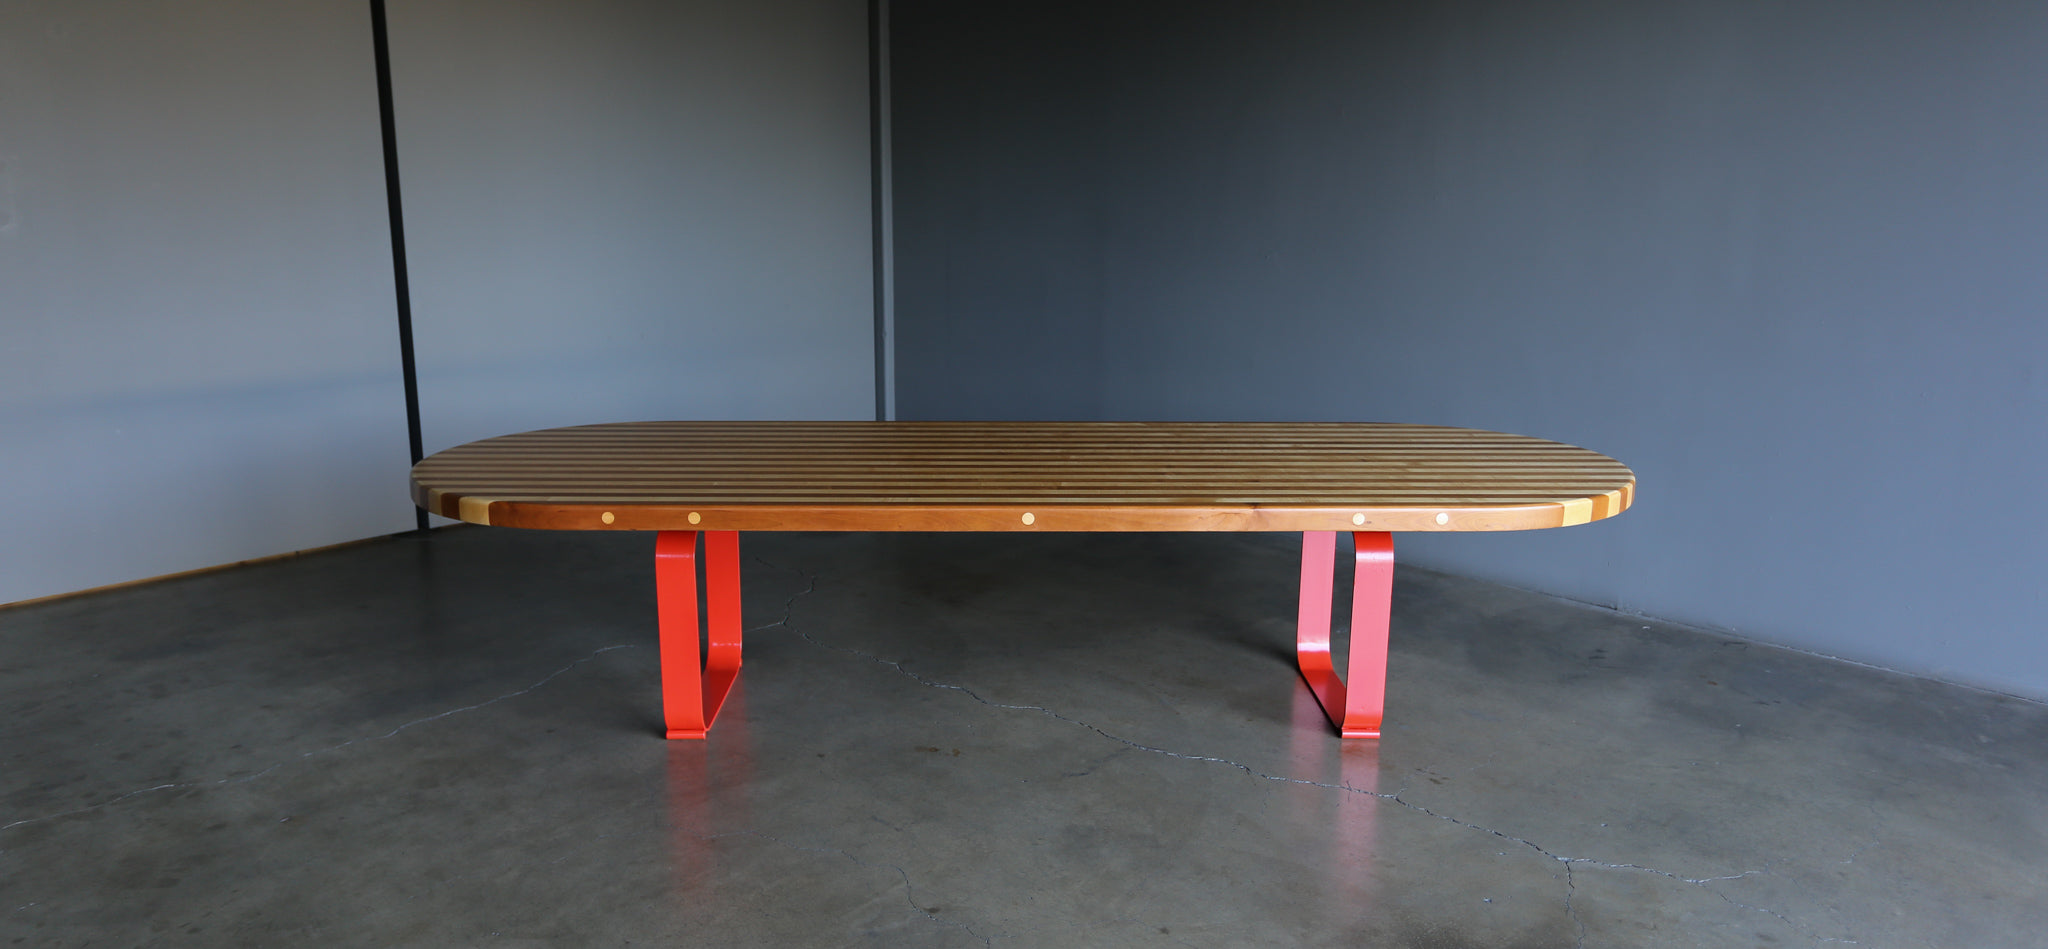 = SOLD = Handcrafted Custom Solid Maple & Cherry Wood Dining Table, 1980